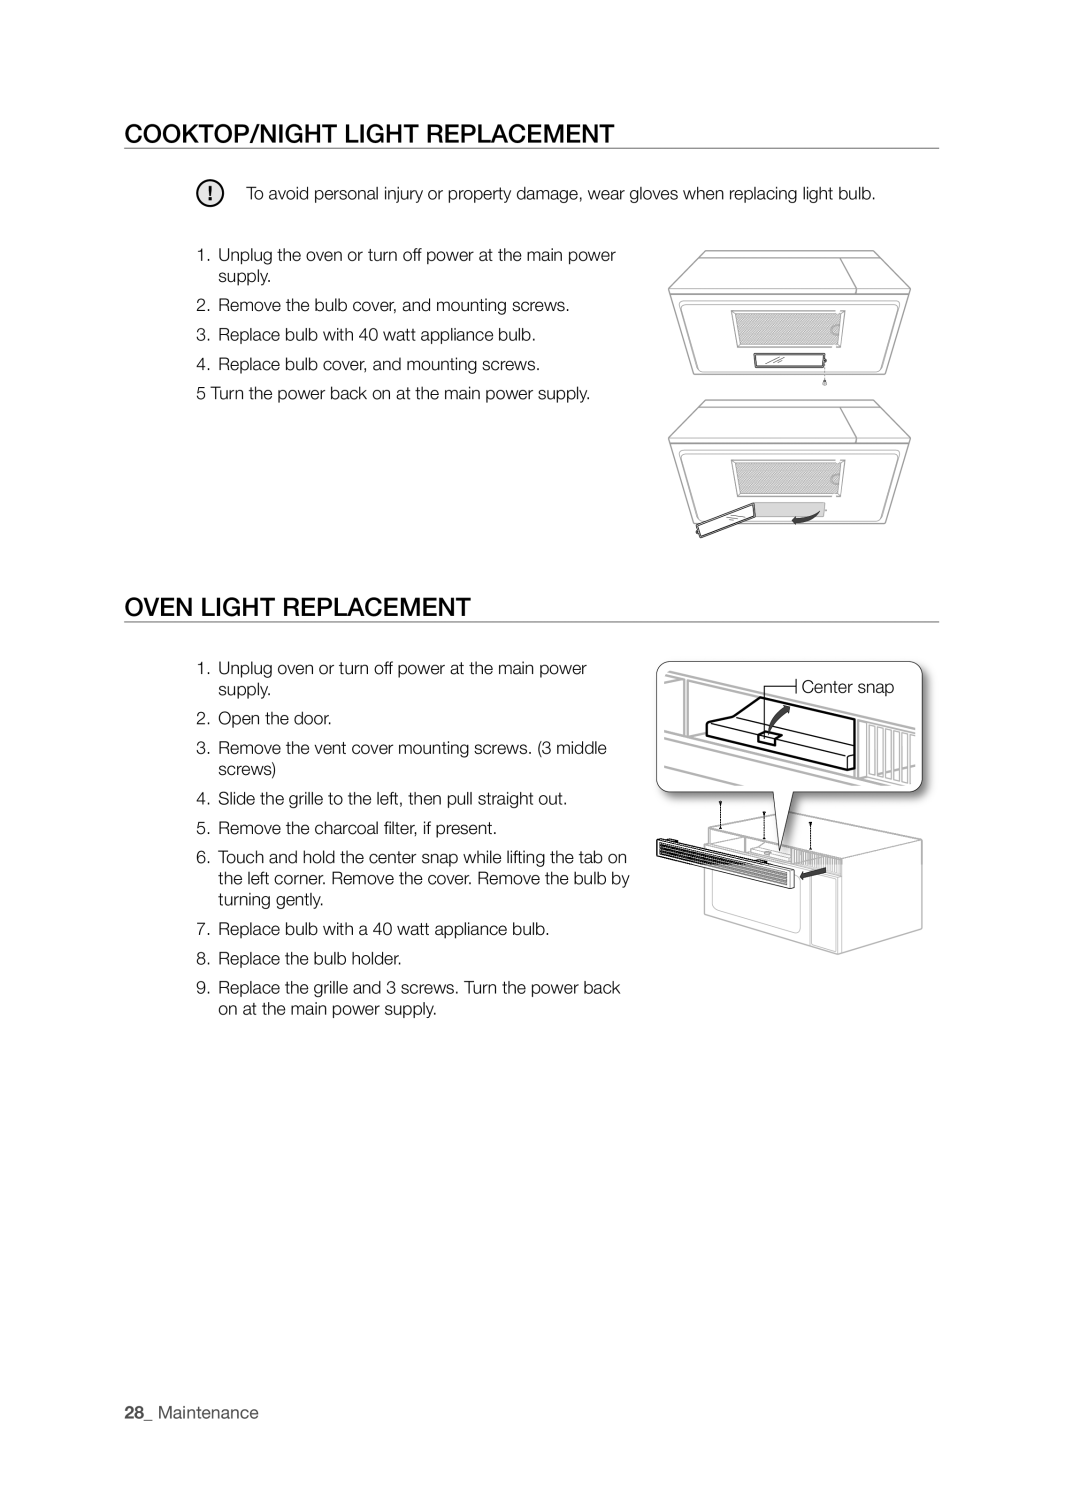 Samsung SMH5165 user manual COOktOp/nIght LIght repLaCement, Oven LIght repLaCement, Maintenance 